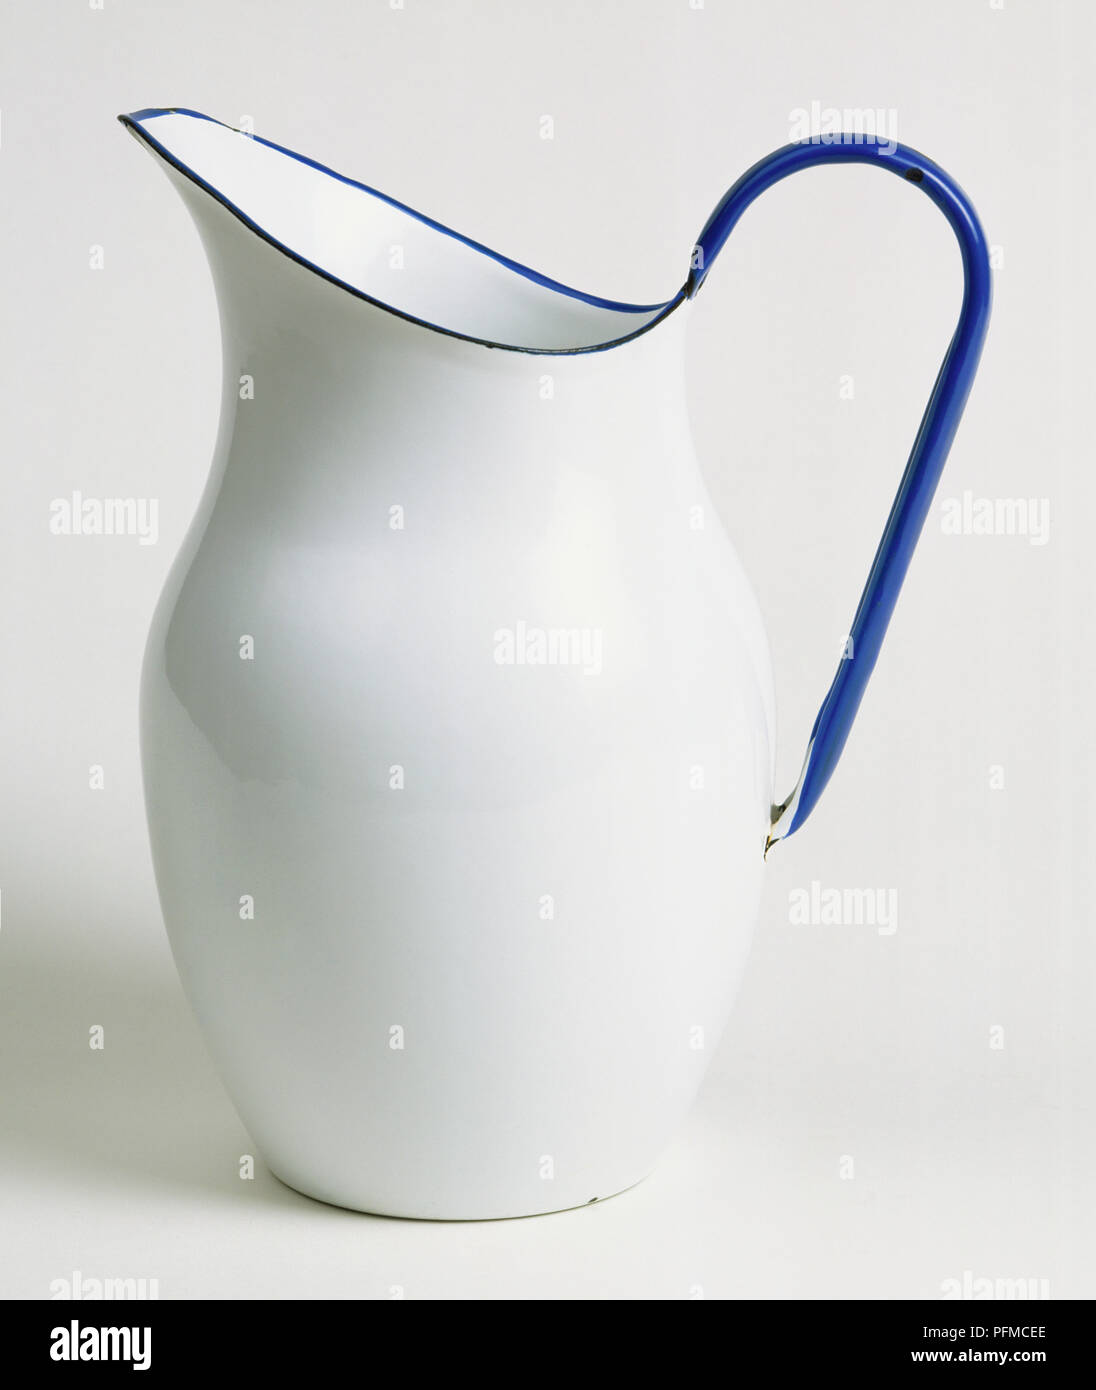 Enamelled metal jug, white with blue rim and handle, side view. Stock Photo